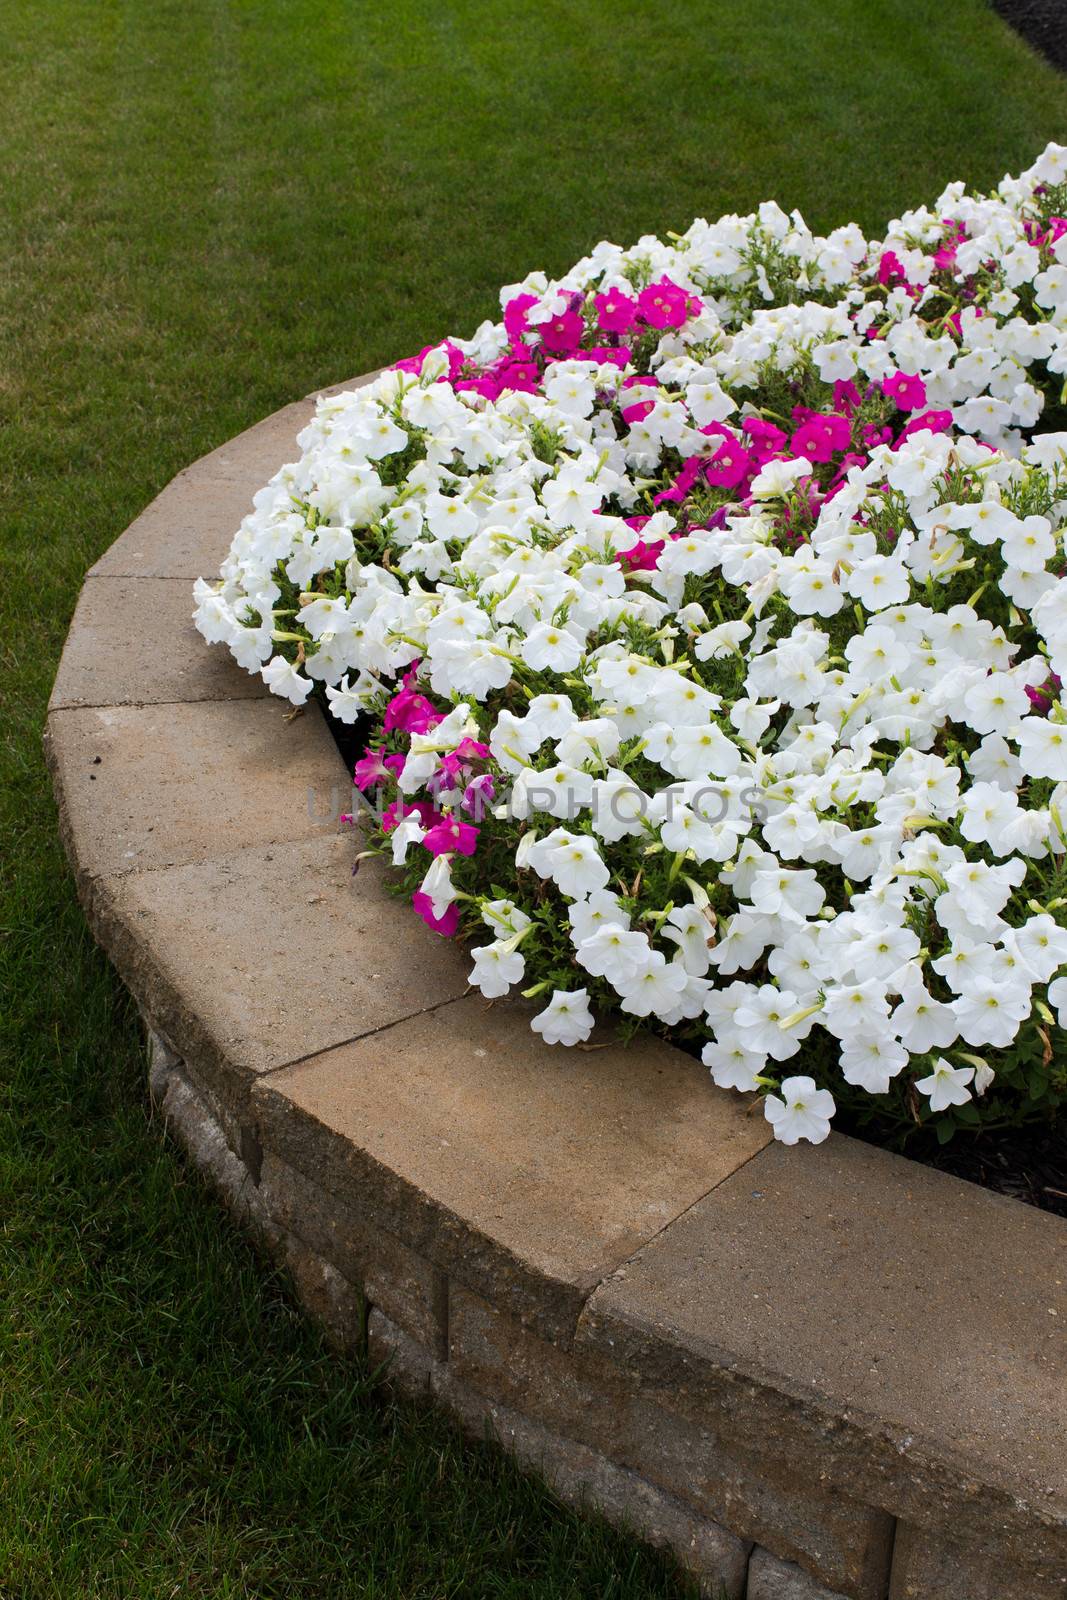 White and some pink petunias are on the brick retaining wall